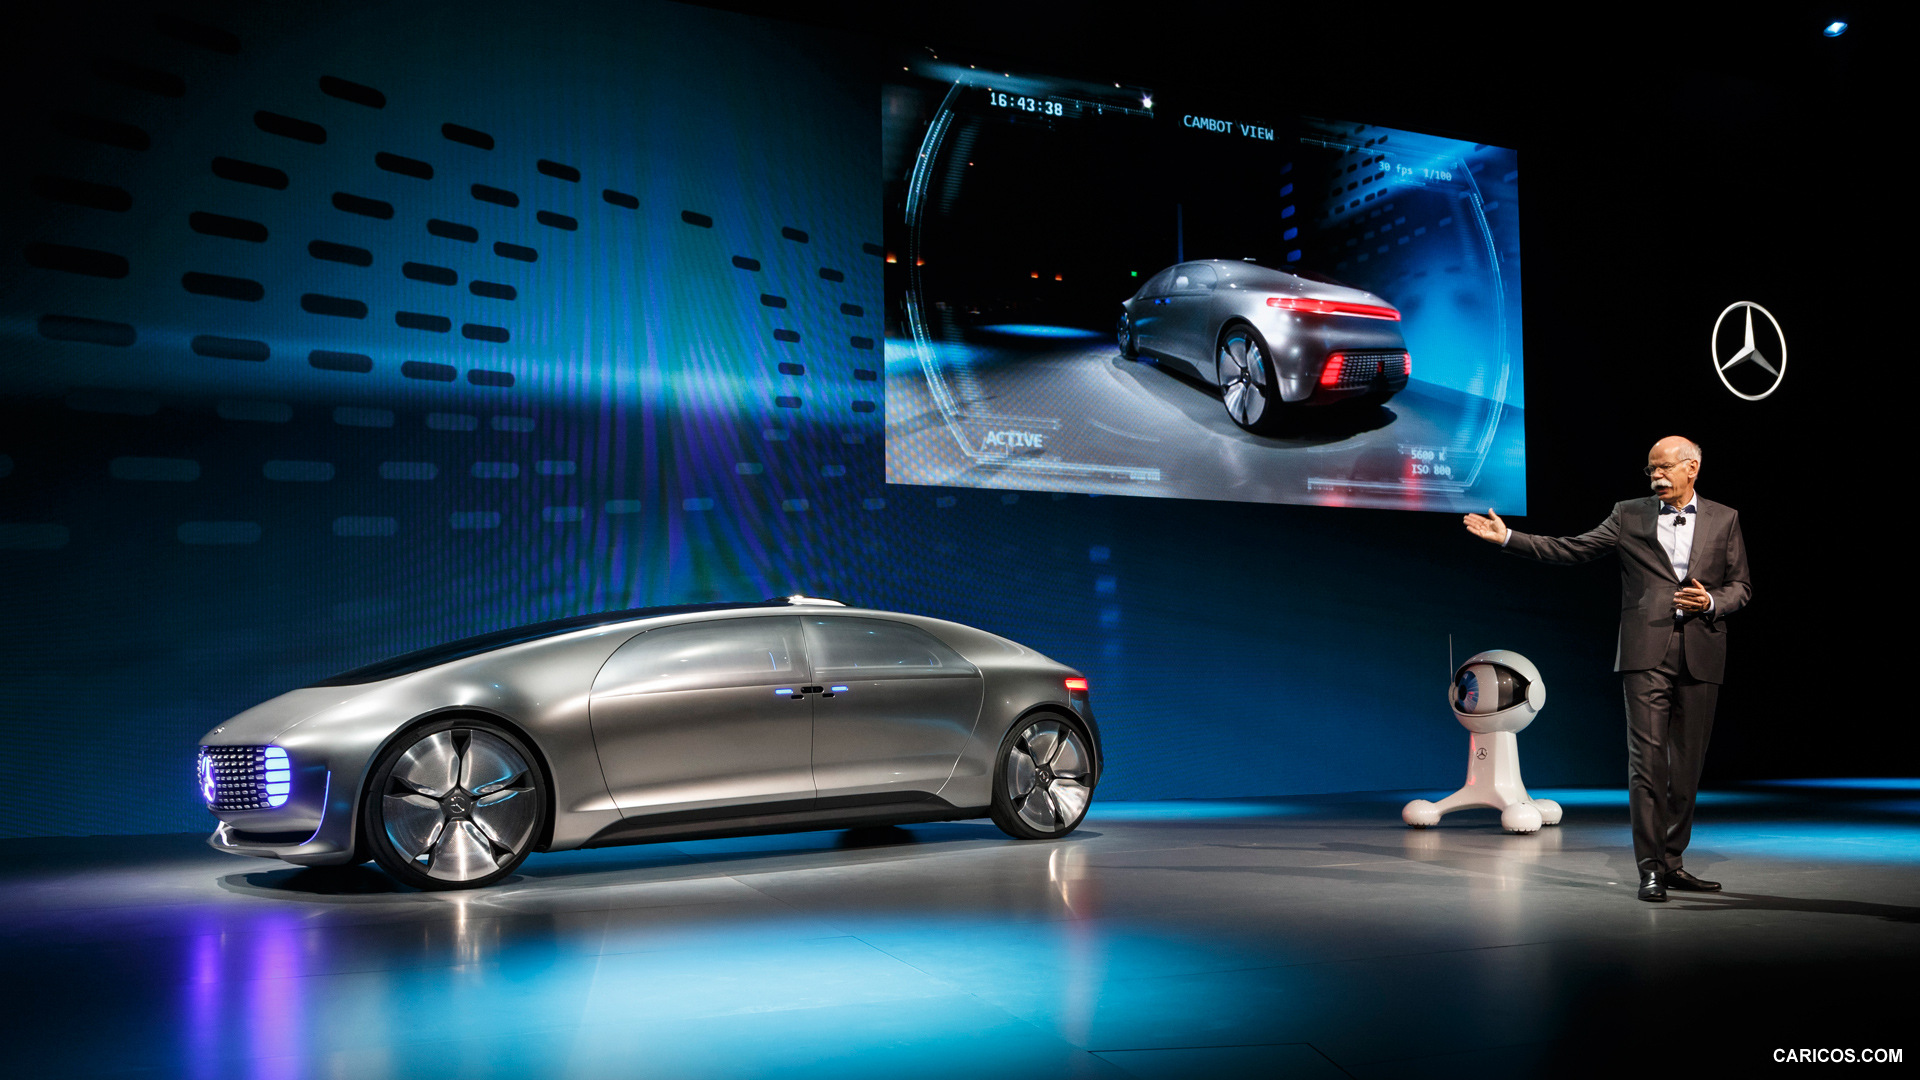 2015 Mercedes-Benz F 015 Luxury in Motion Concept at CES - Side, #83 of 92